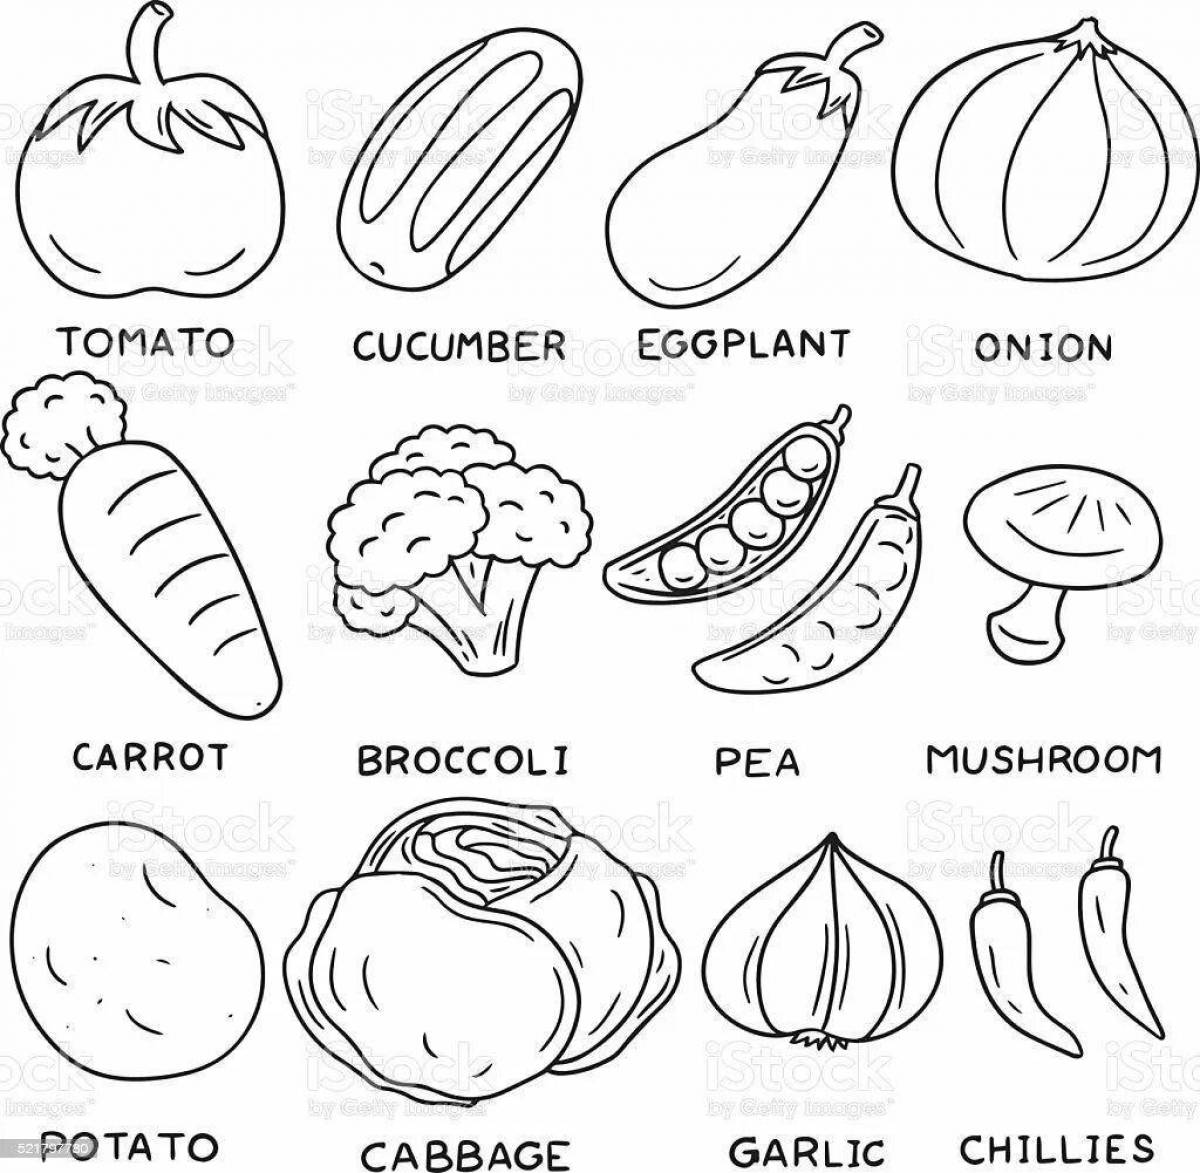 Vegetables in English for kids #5